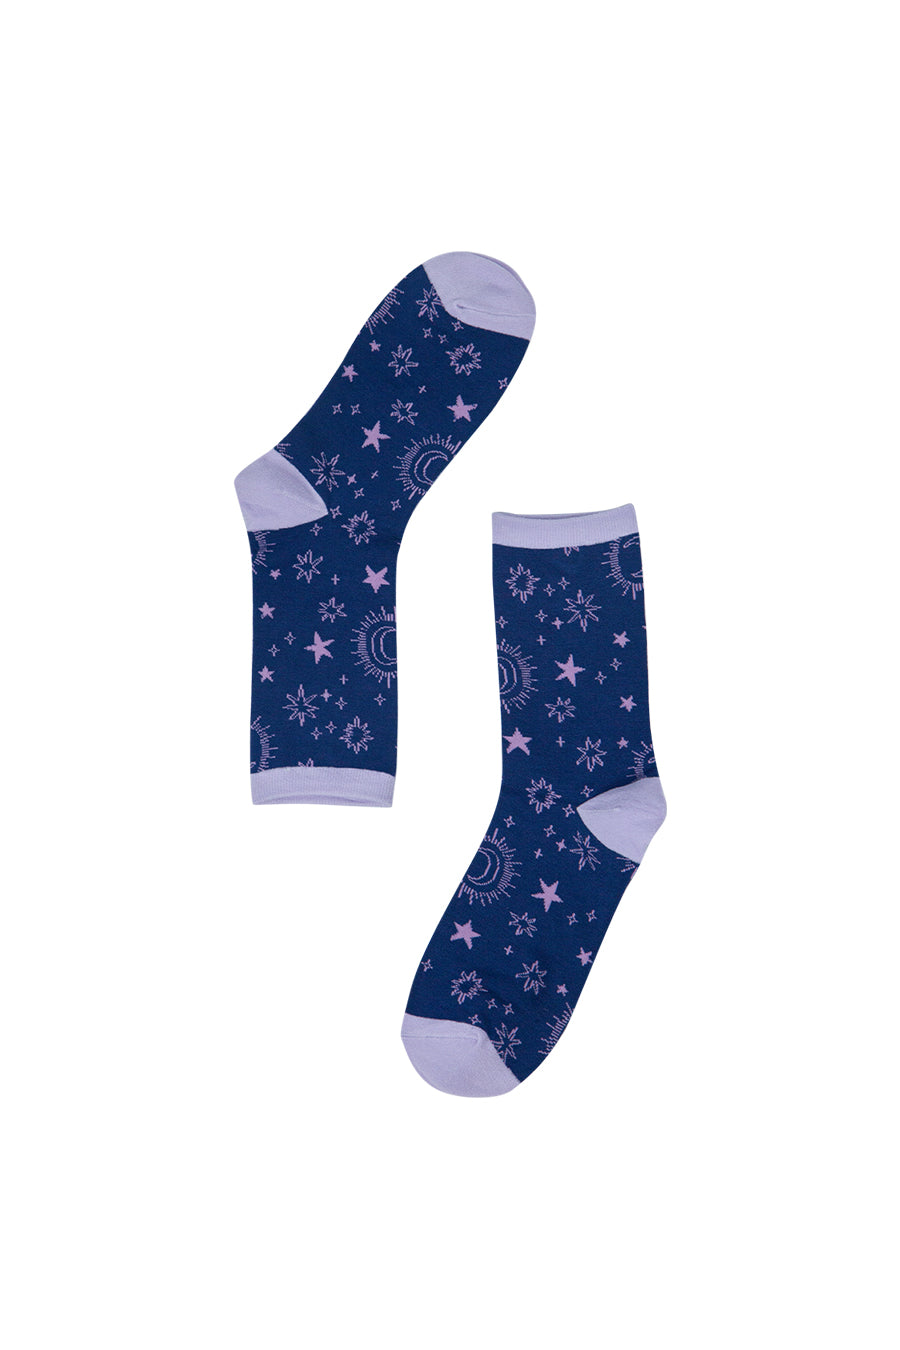 navy blue ankle socks with a scattered star print pattern